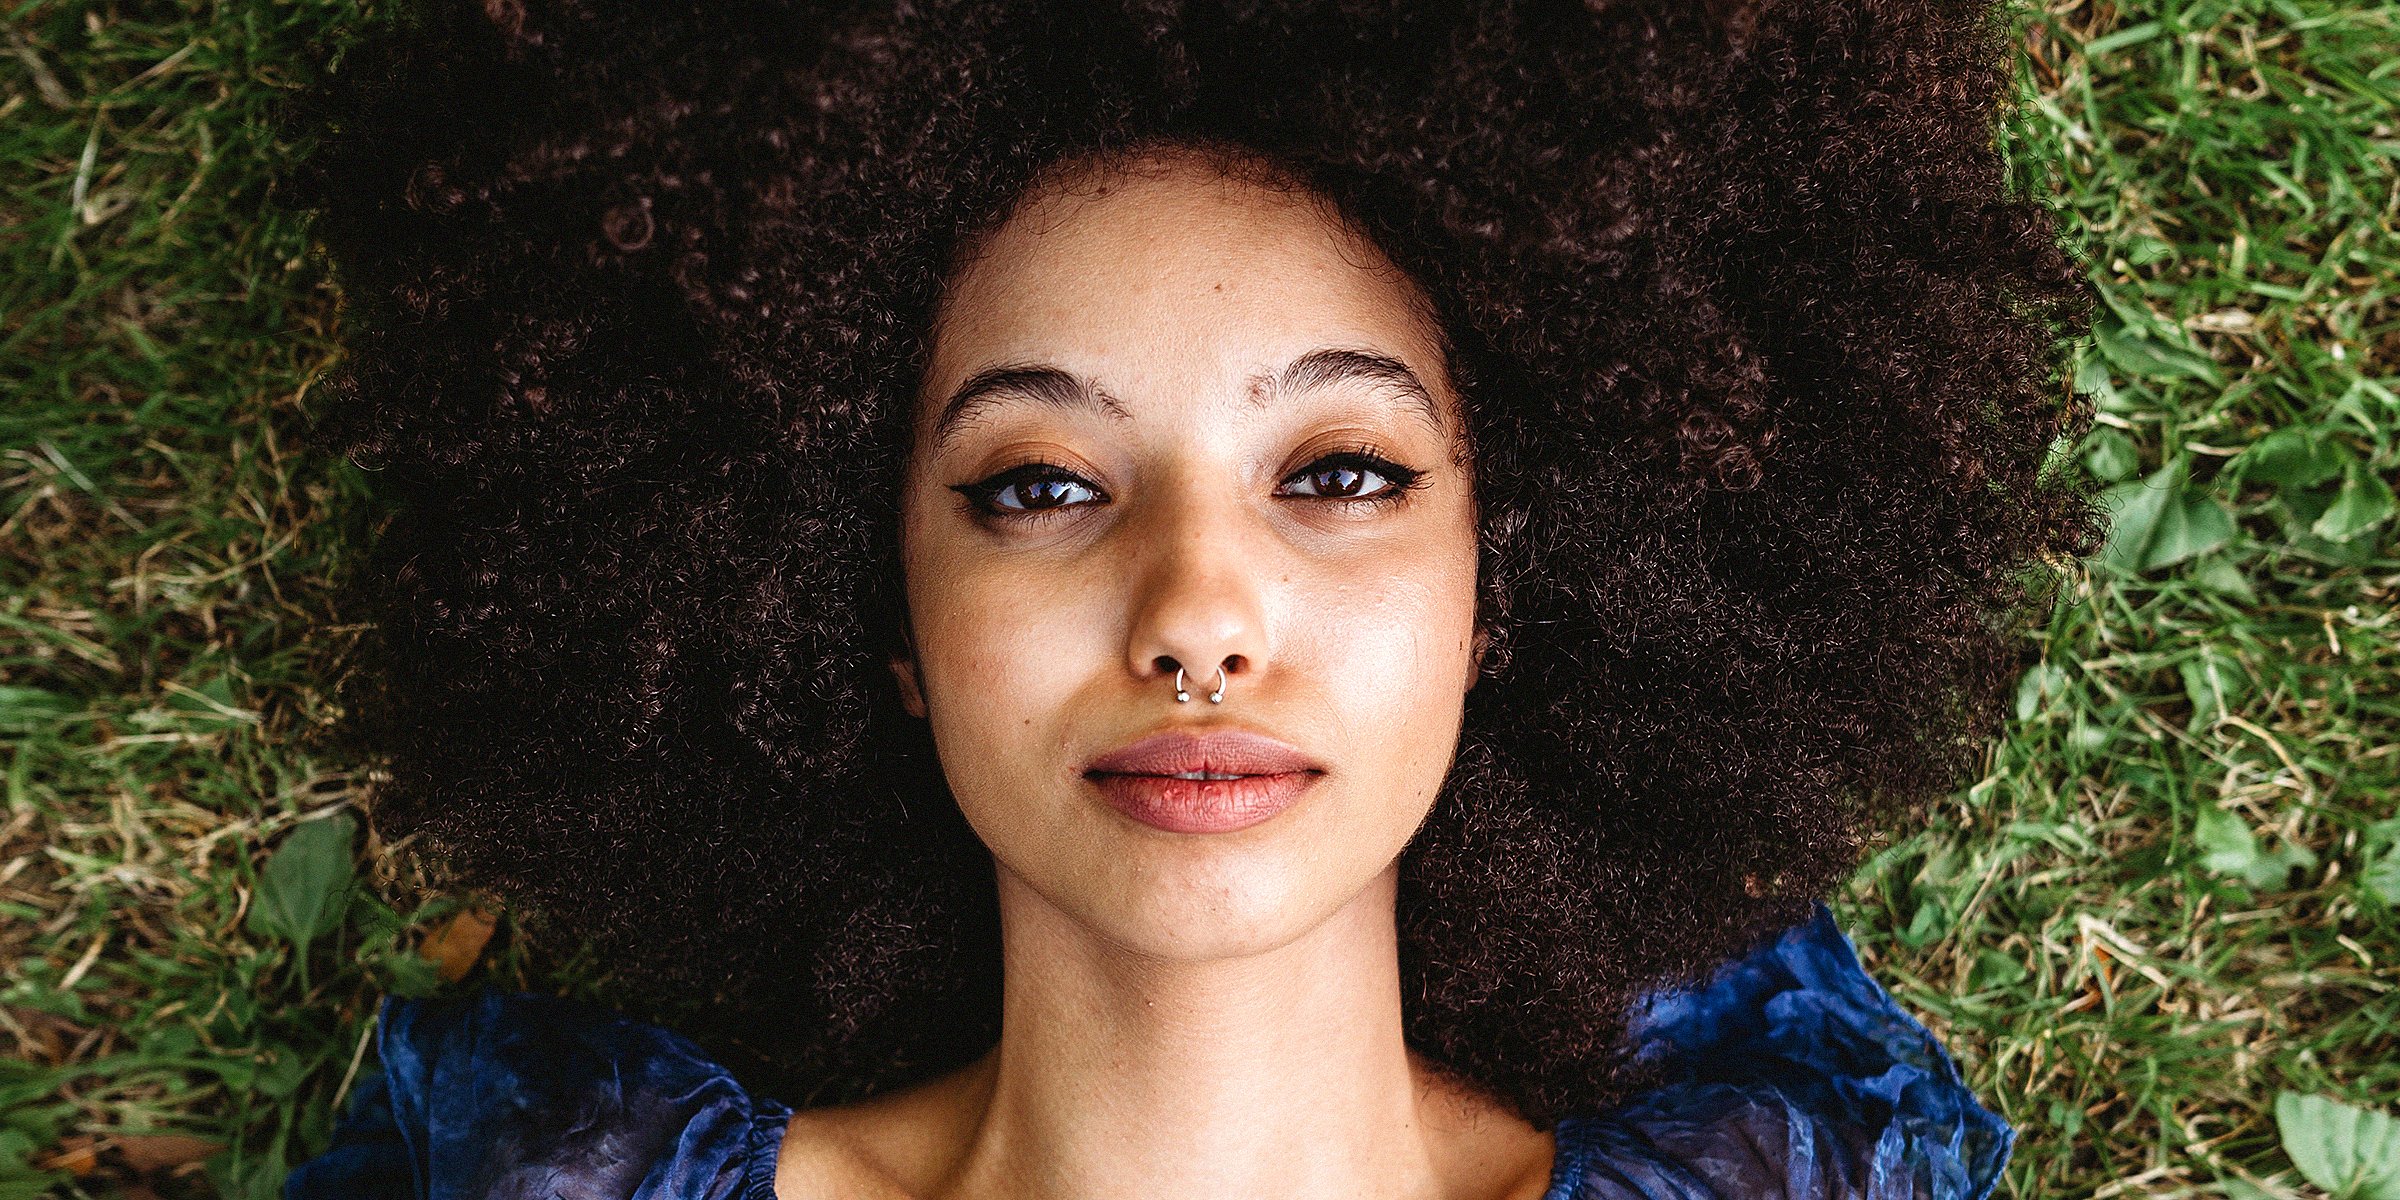 A model with septum piercing | Source: Shutterstock